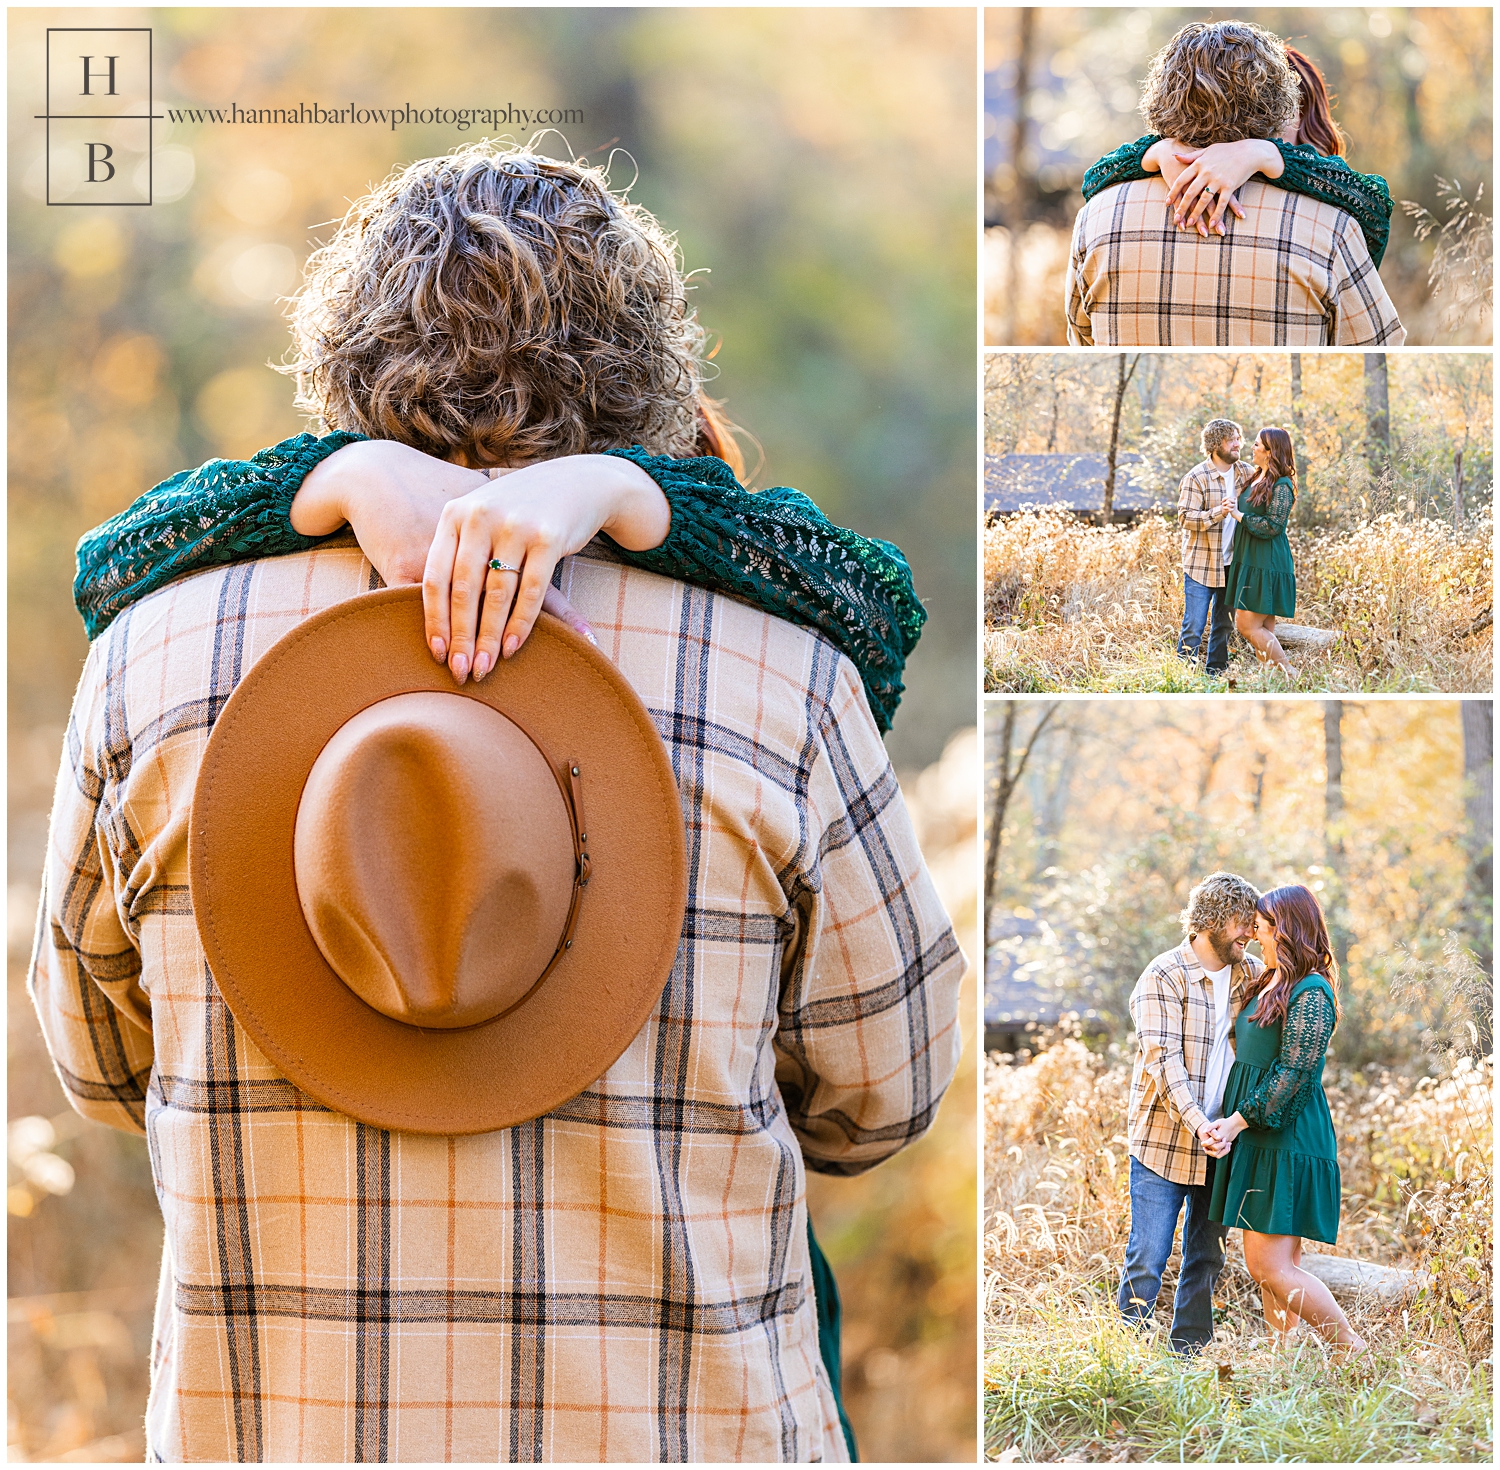 Women in hat poses in fall yellow trees for engagement photos.